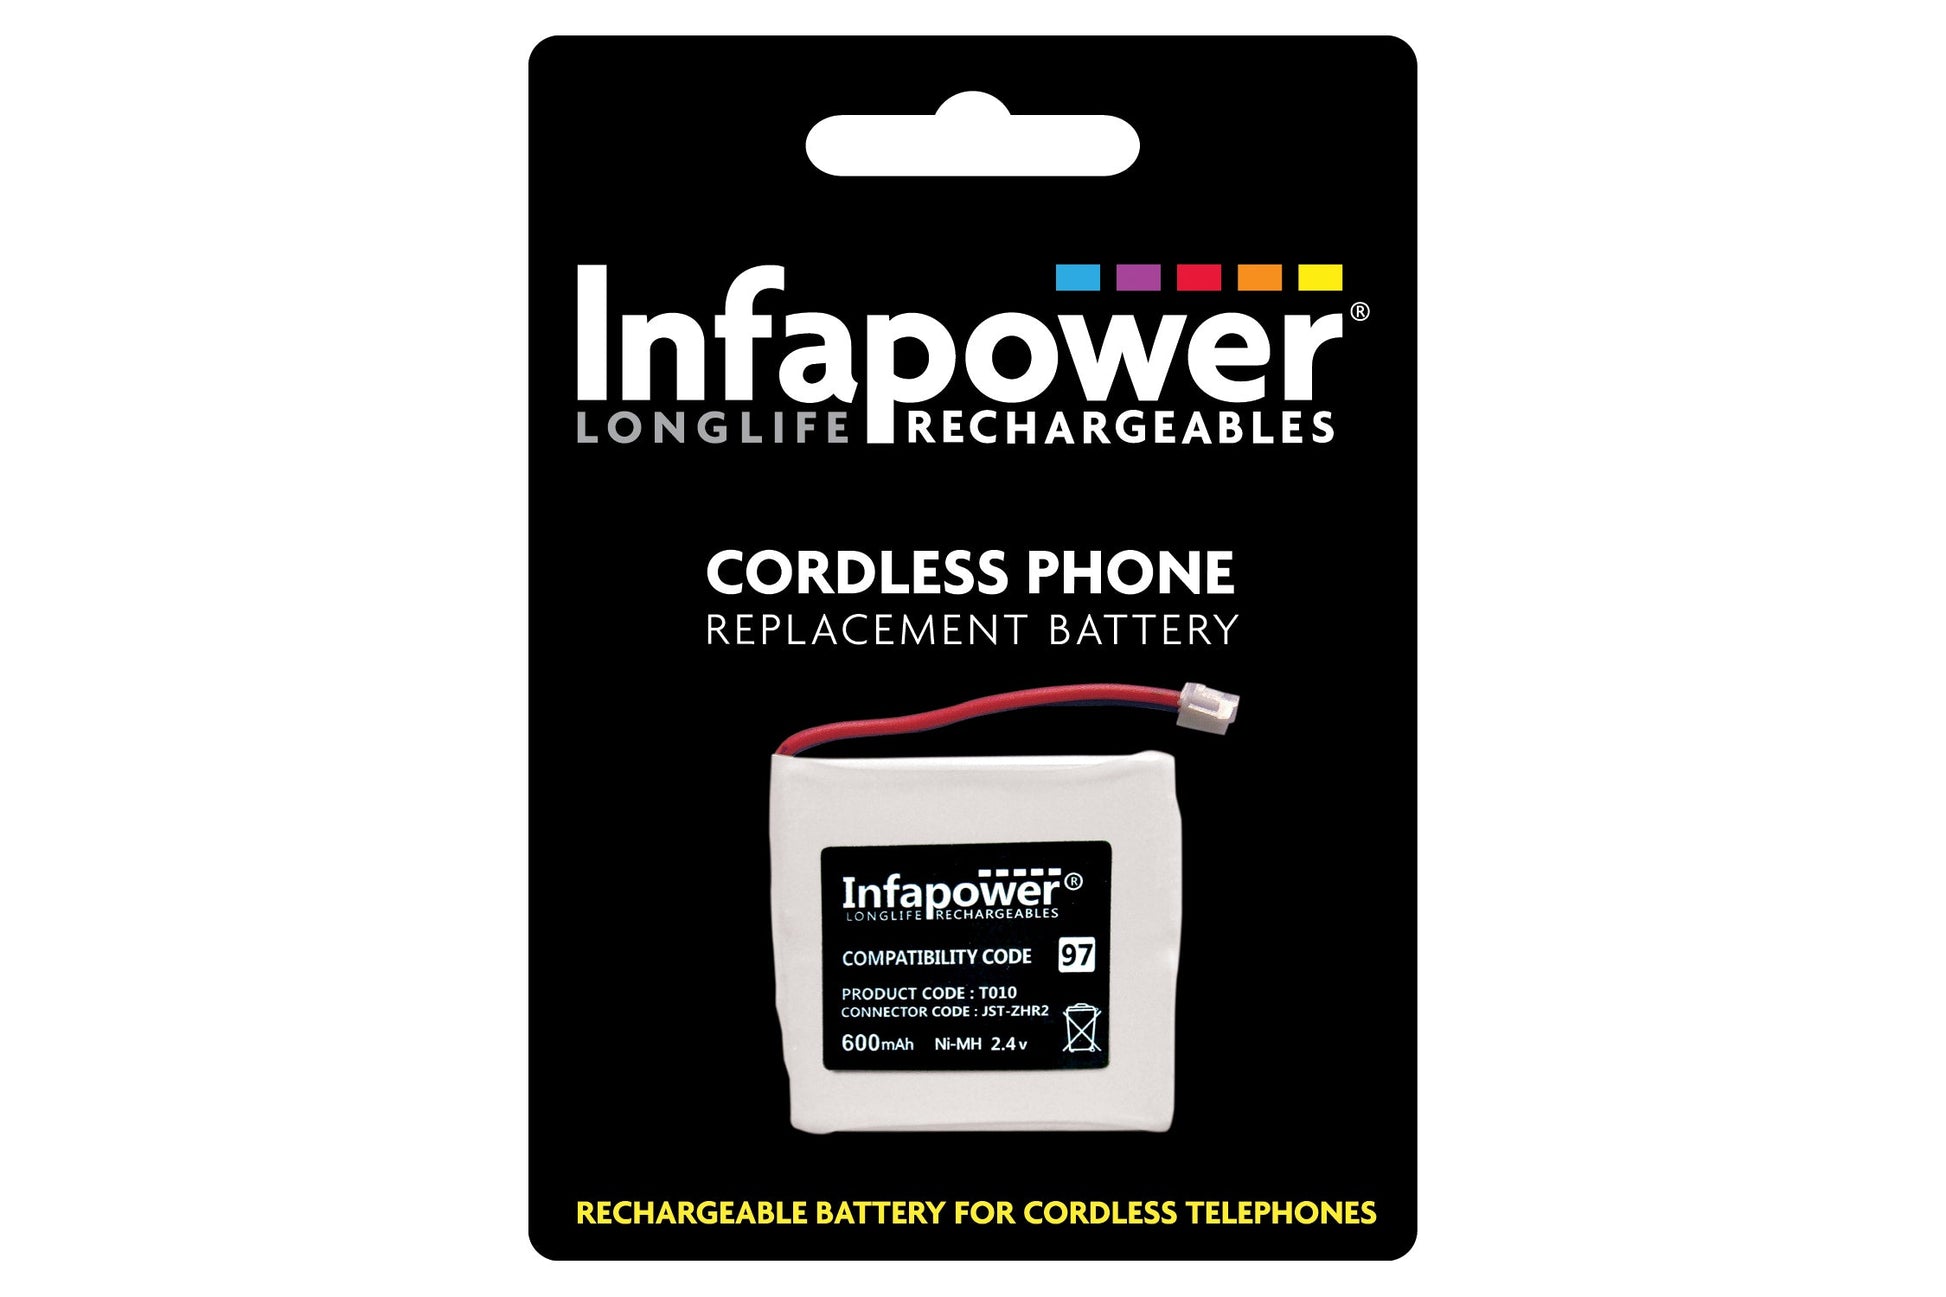 InfaPower Cordless Telephone Rechargeable Ni-MH Prismatic Batteries - Pack of 2 - maplin.co.uk